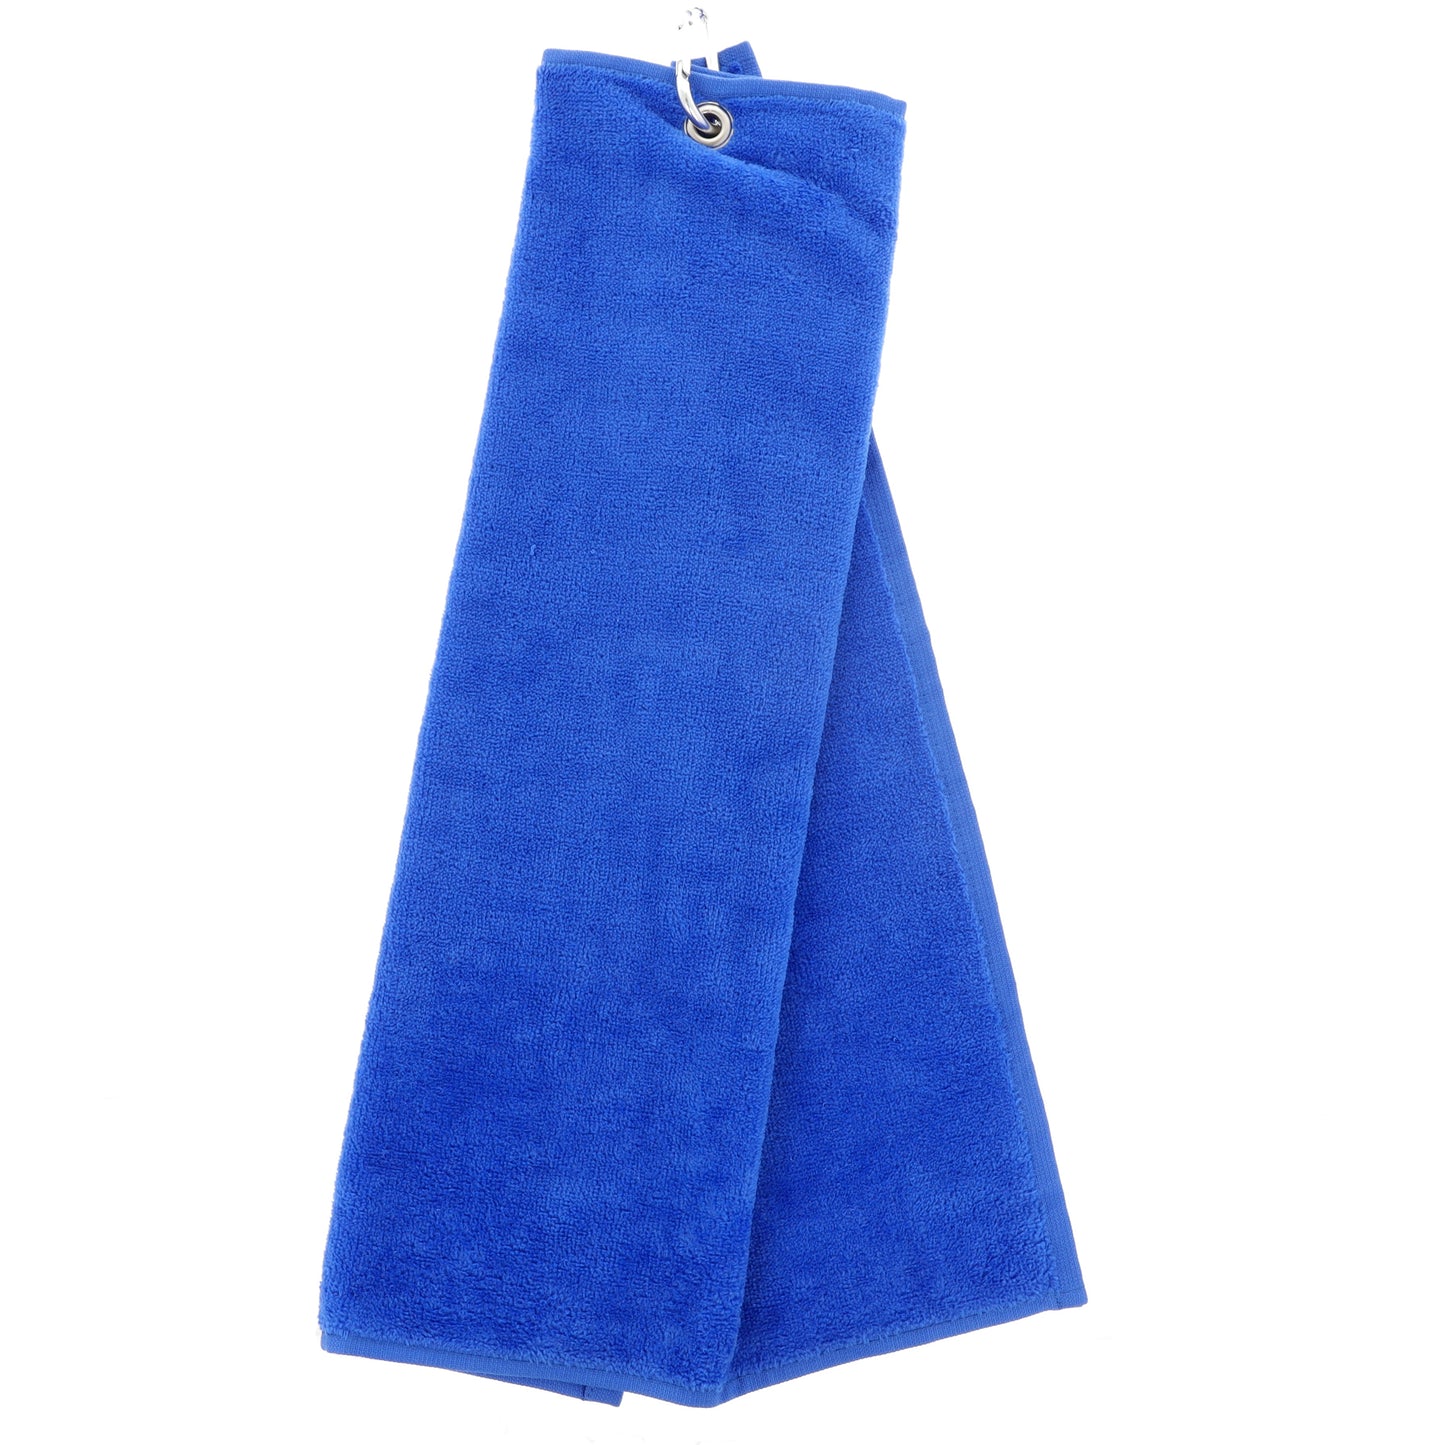 Personalised Embroidered Tri Fold TENNIS Towel Trifold with Carabiner Clip  - Always Looking Good - Royal Blue  